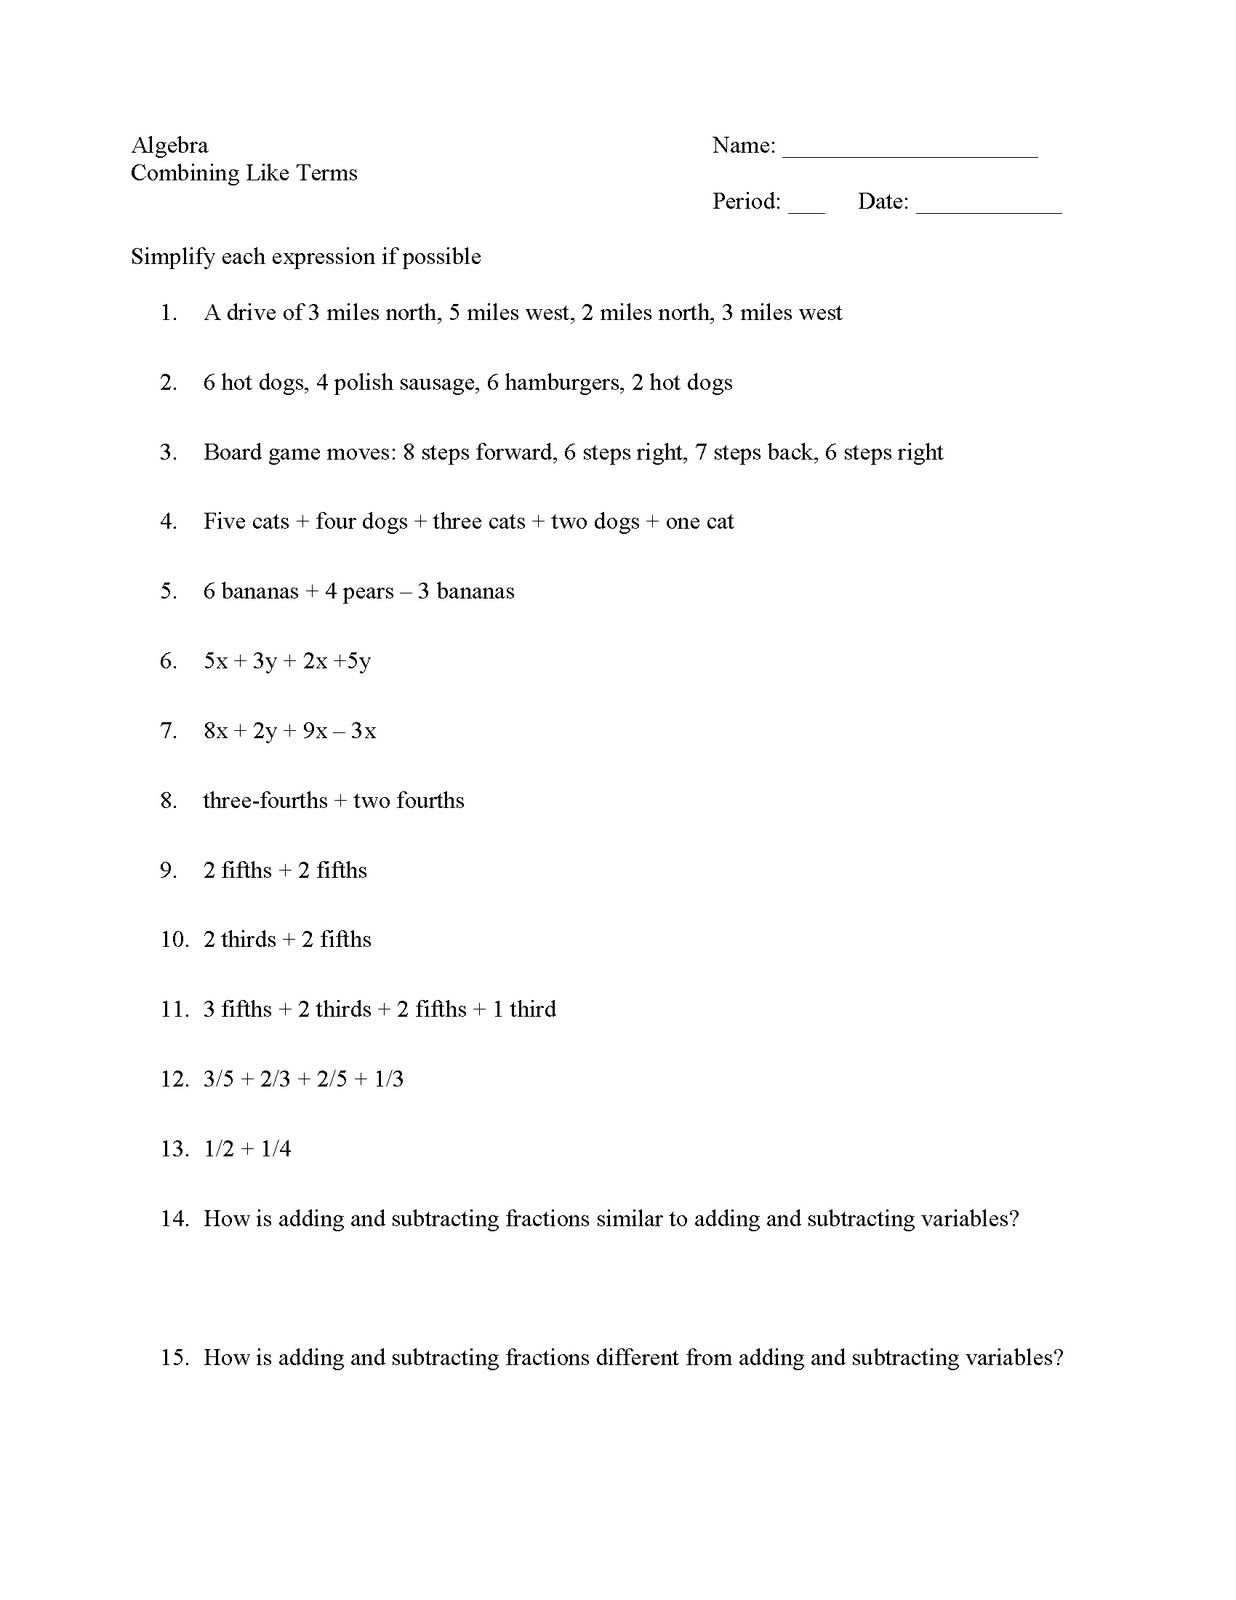 13-best-images-of-adding-like-terms-worksheet-adding-and-subtracting-like-fractions-worksheets